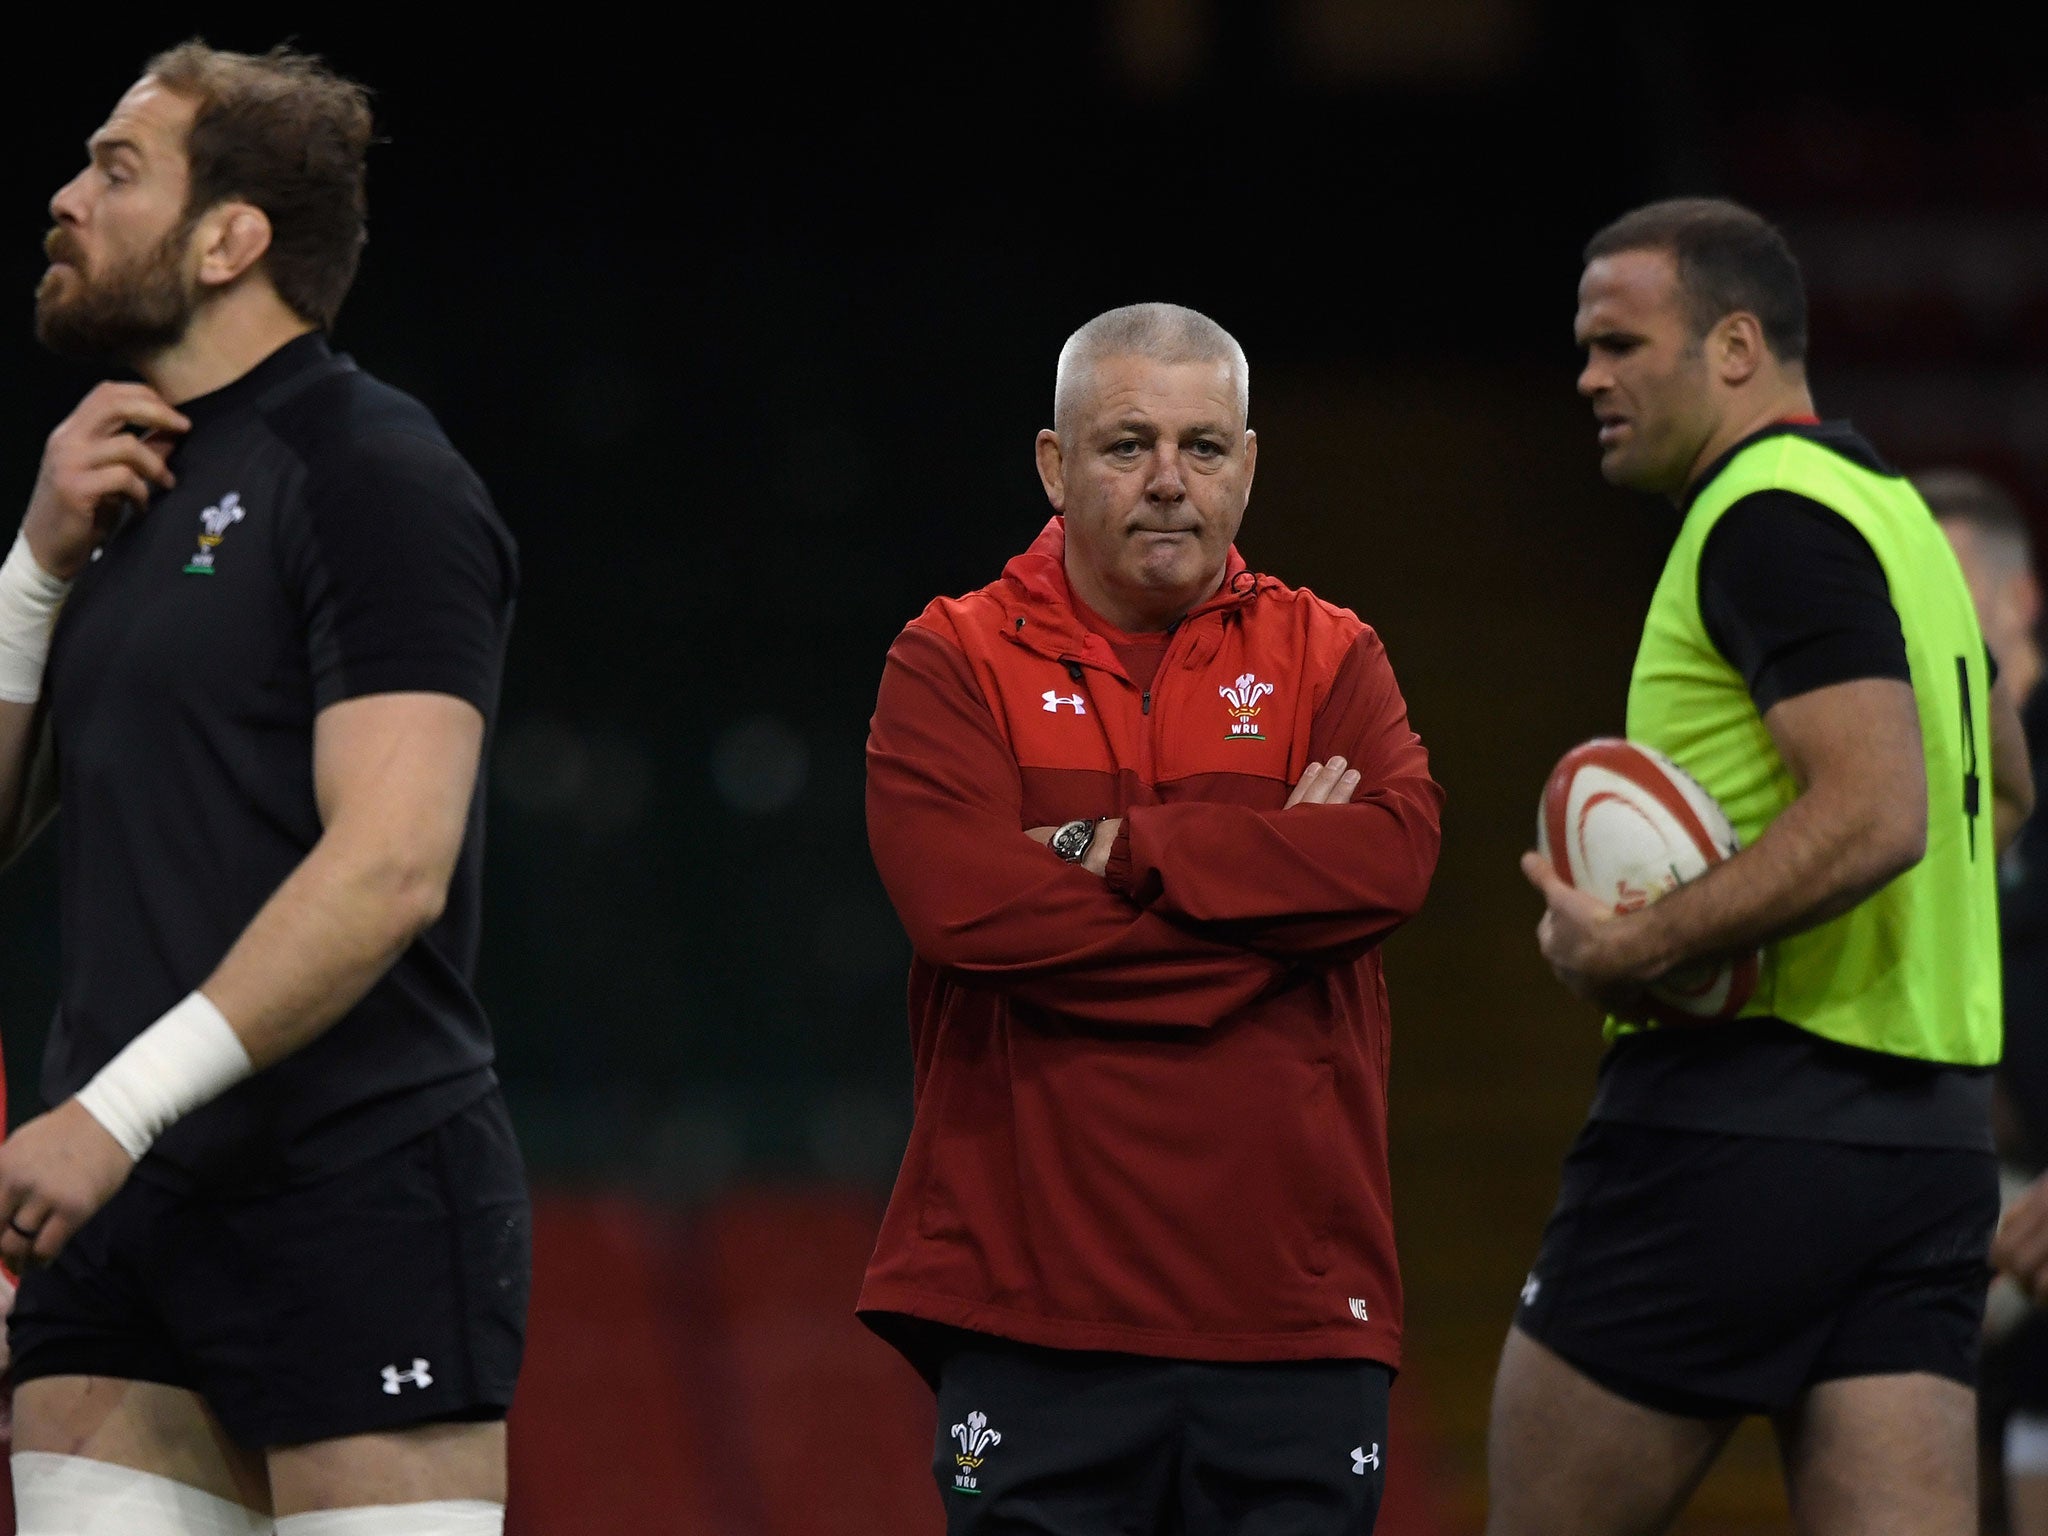 Warren Gatland oversaw victory against the All Blacks earlier this year with the Lions